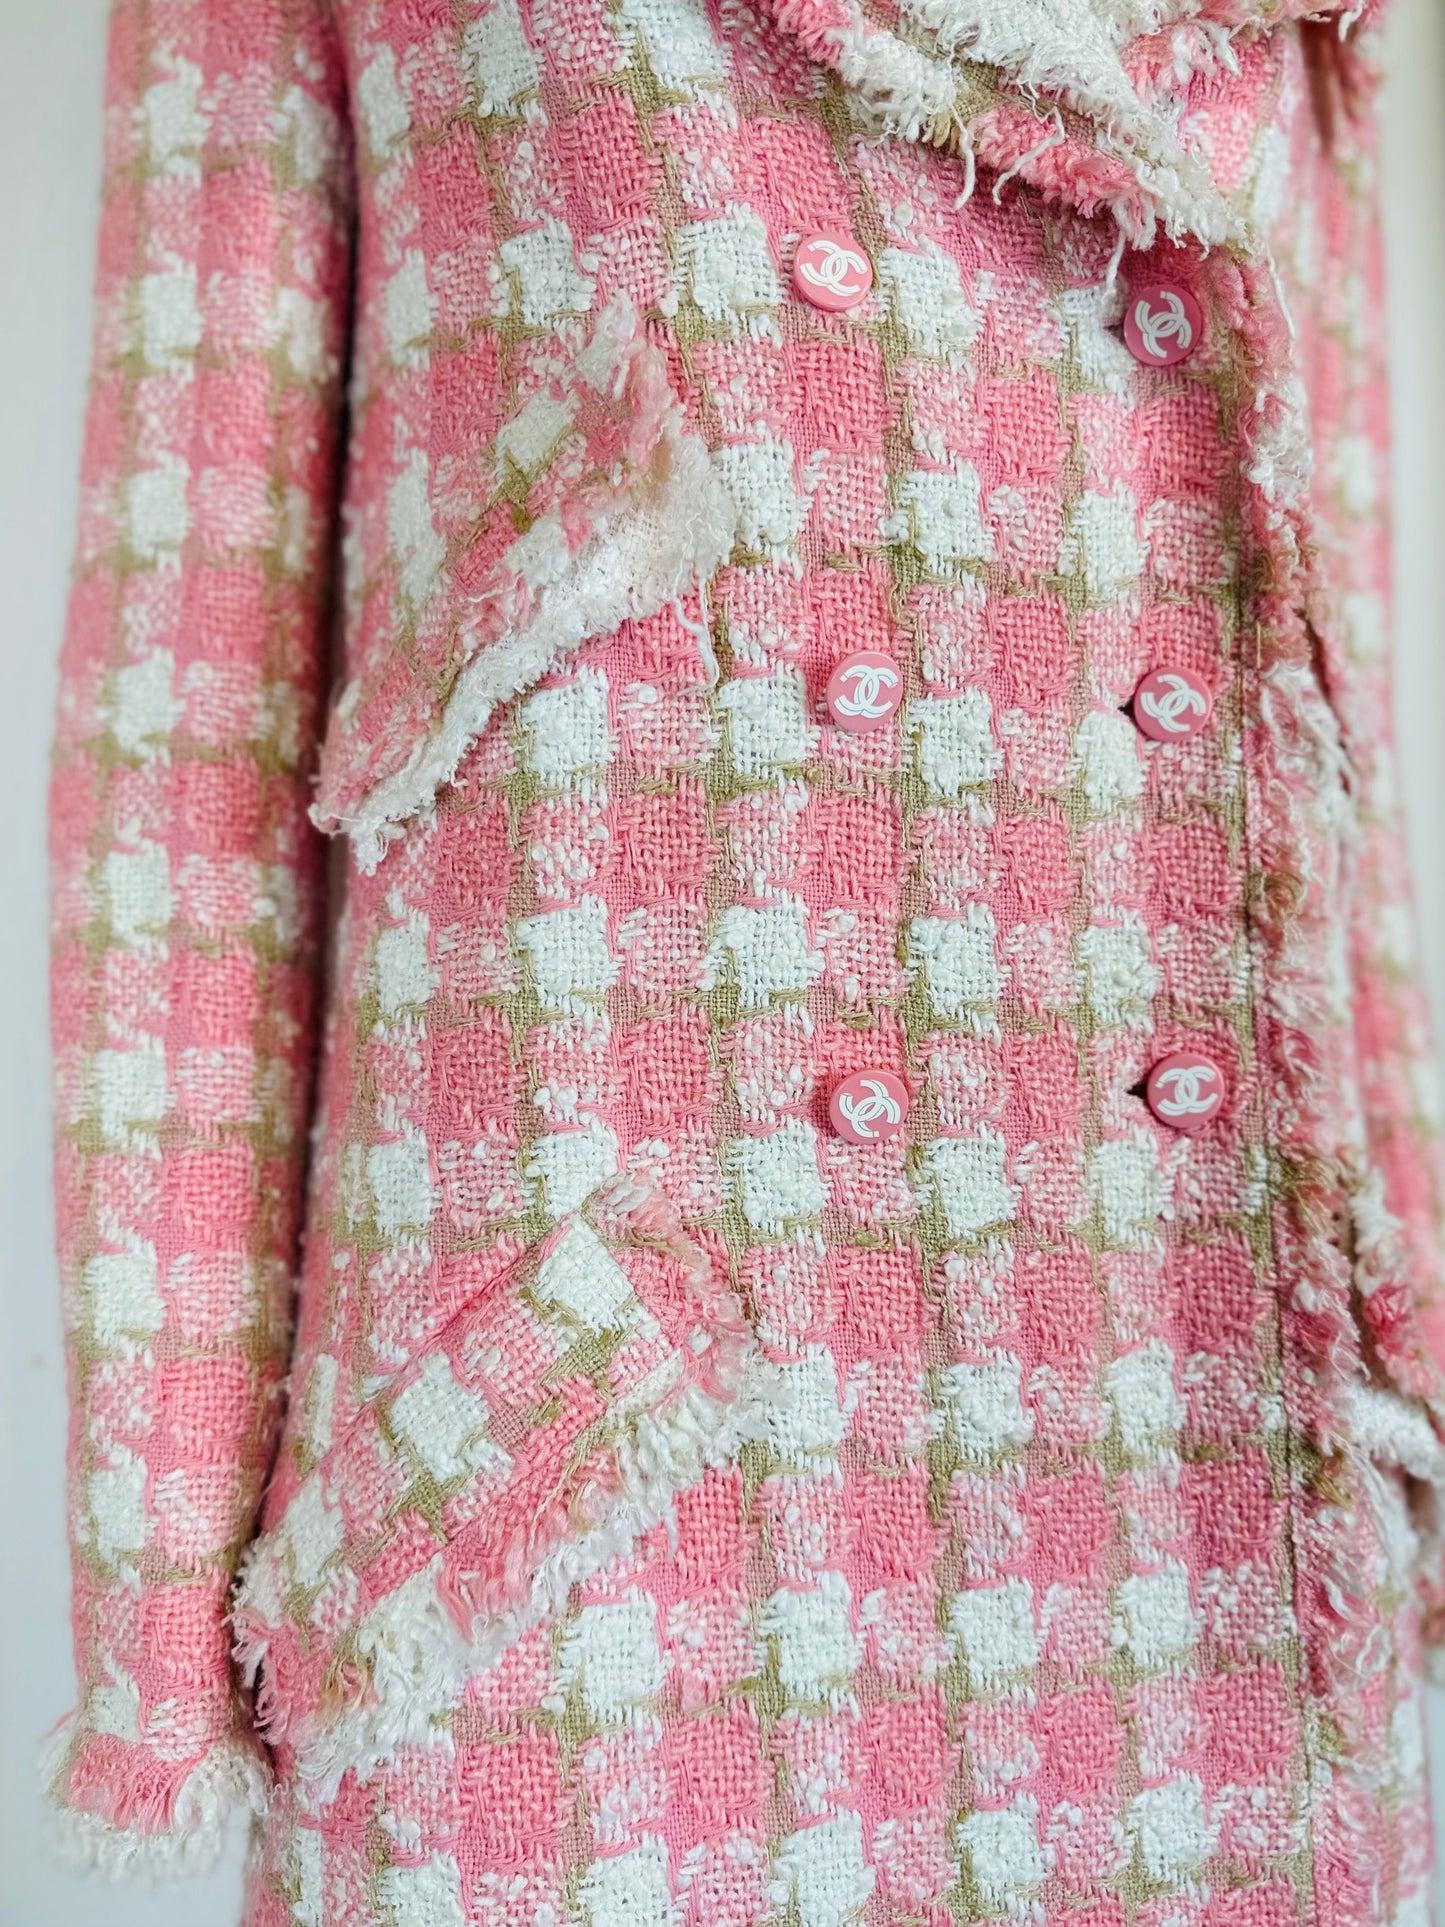 CHANEL - LONG COAT TWEED PINK & WHITE SIZE 36 FR